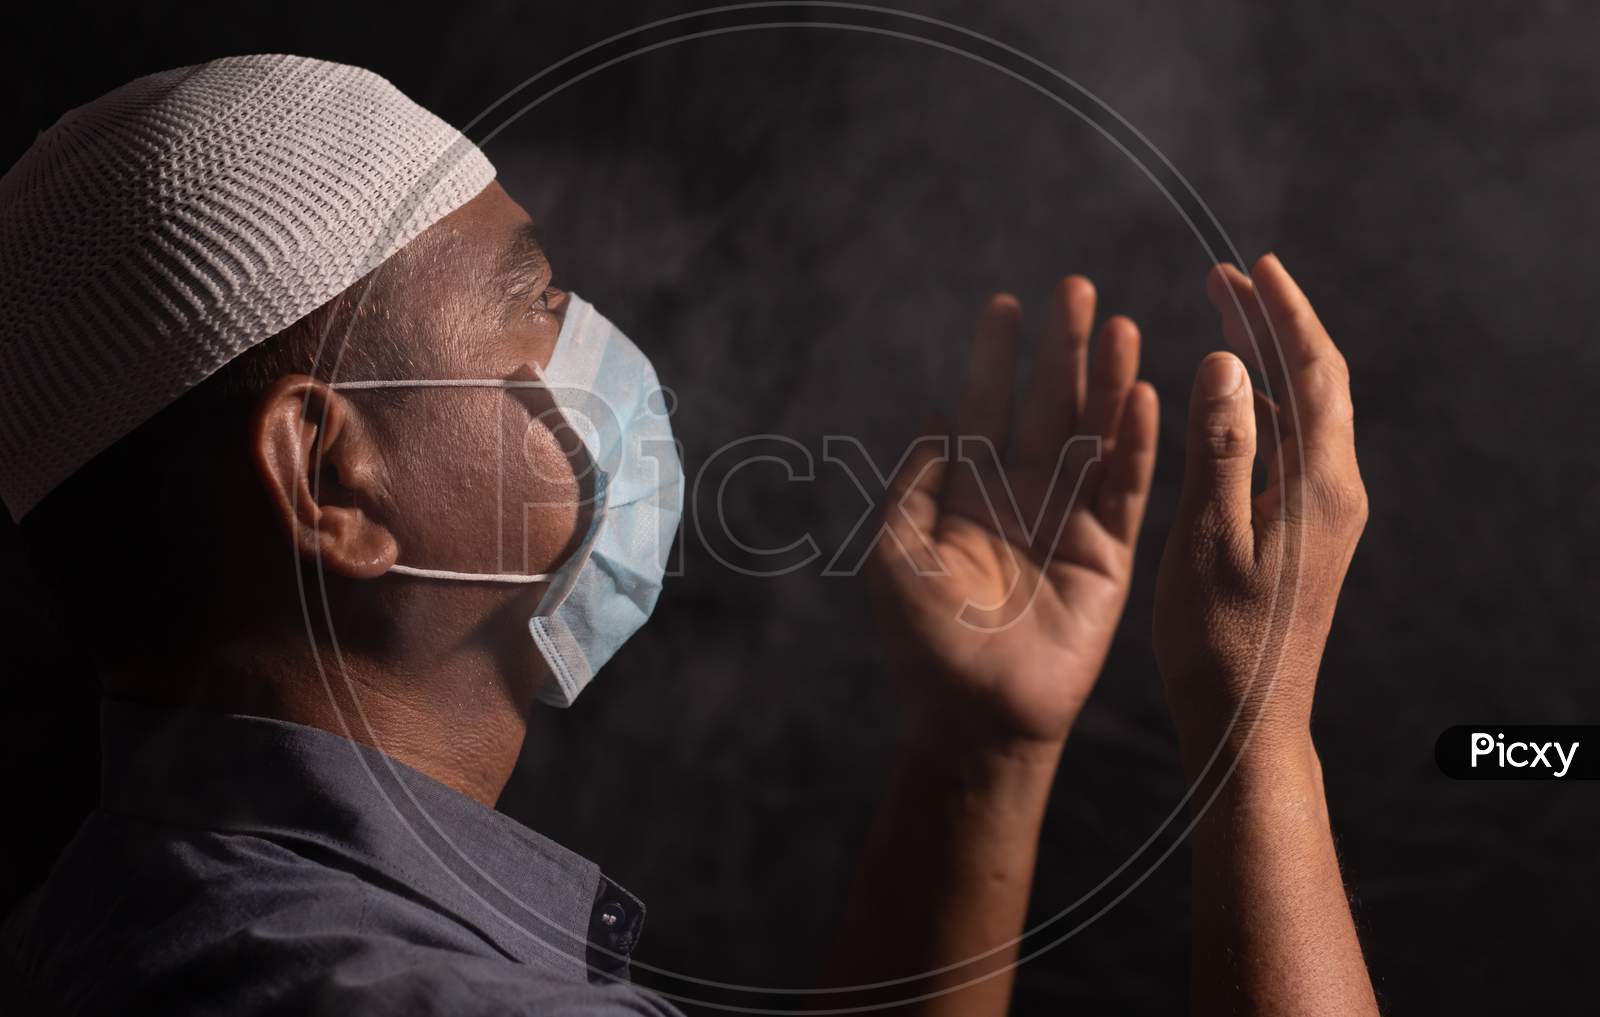 Muslim Man With Medical Mask And Cap Praying To God In Dark Room To Protect Or Save From Covid-19 Or Coronavirus Crisis - Spirituality And Surrender Concept.